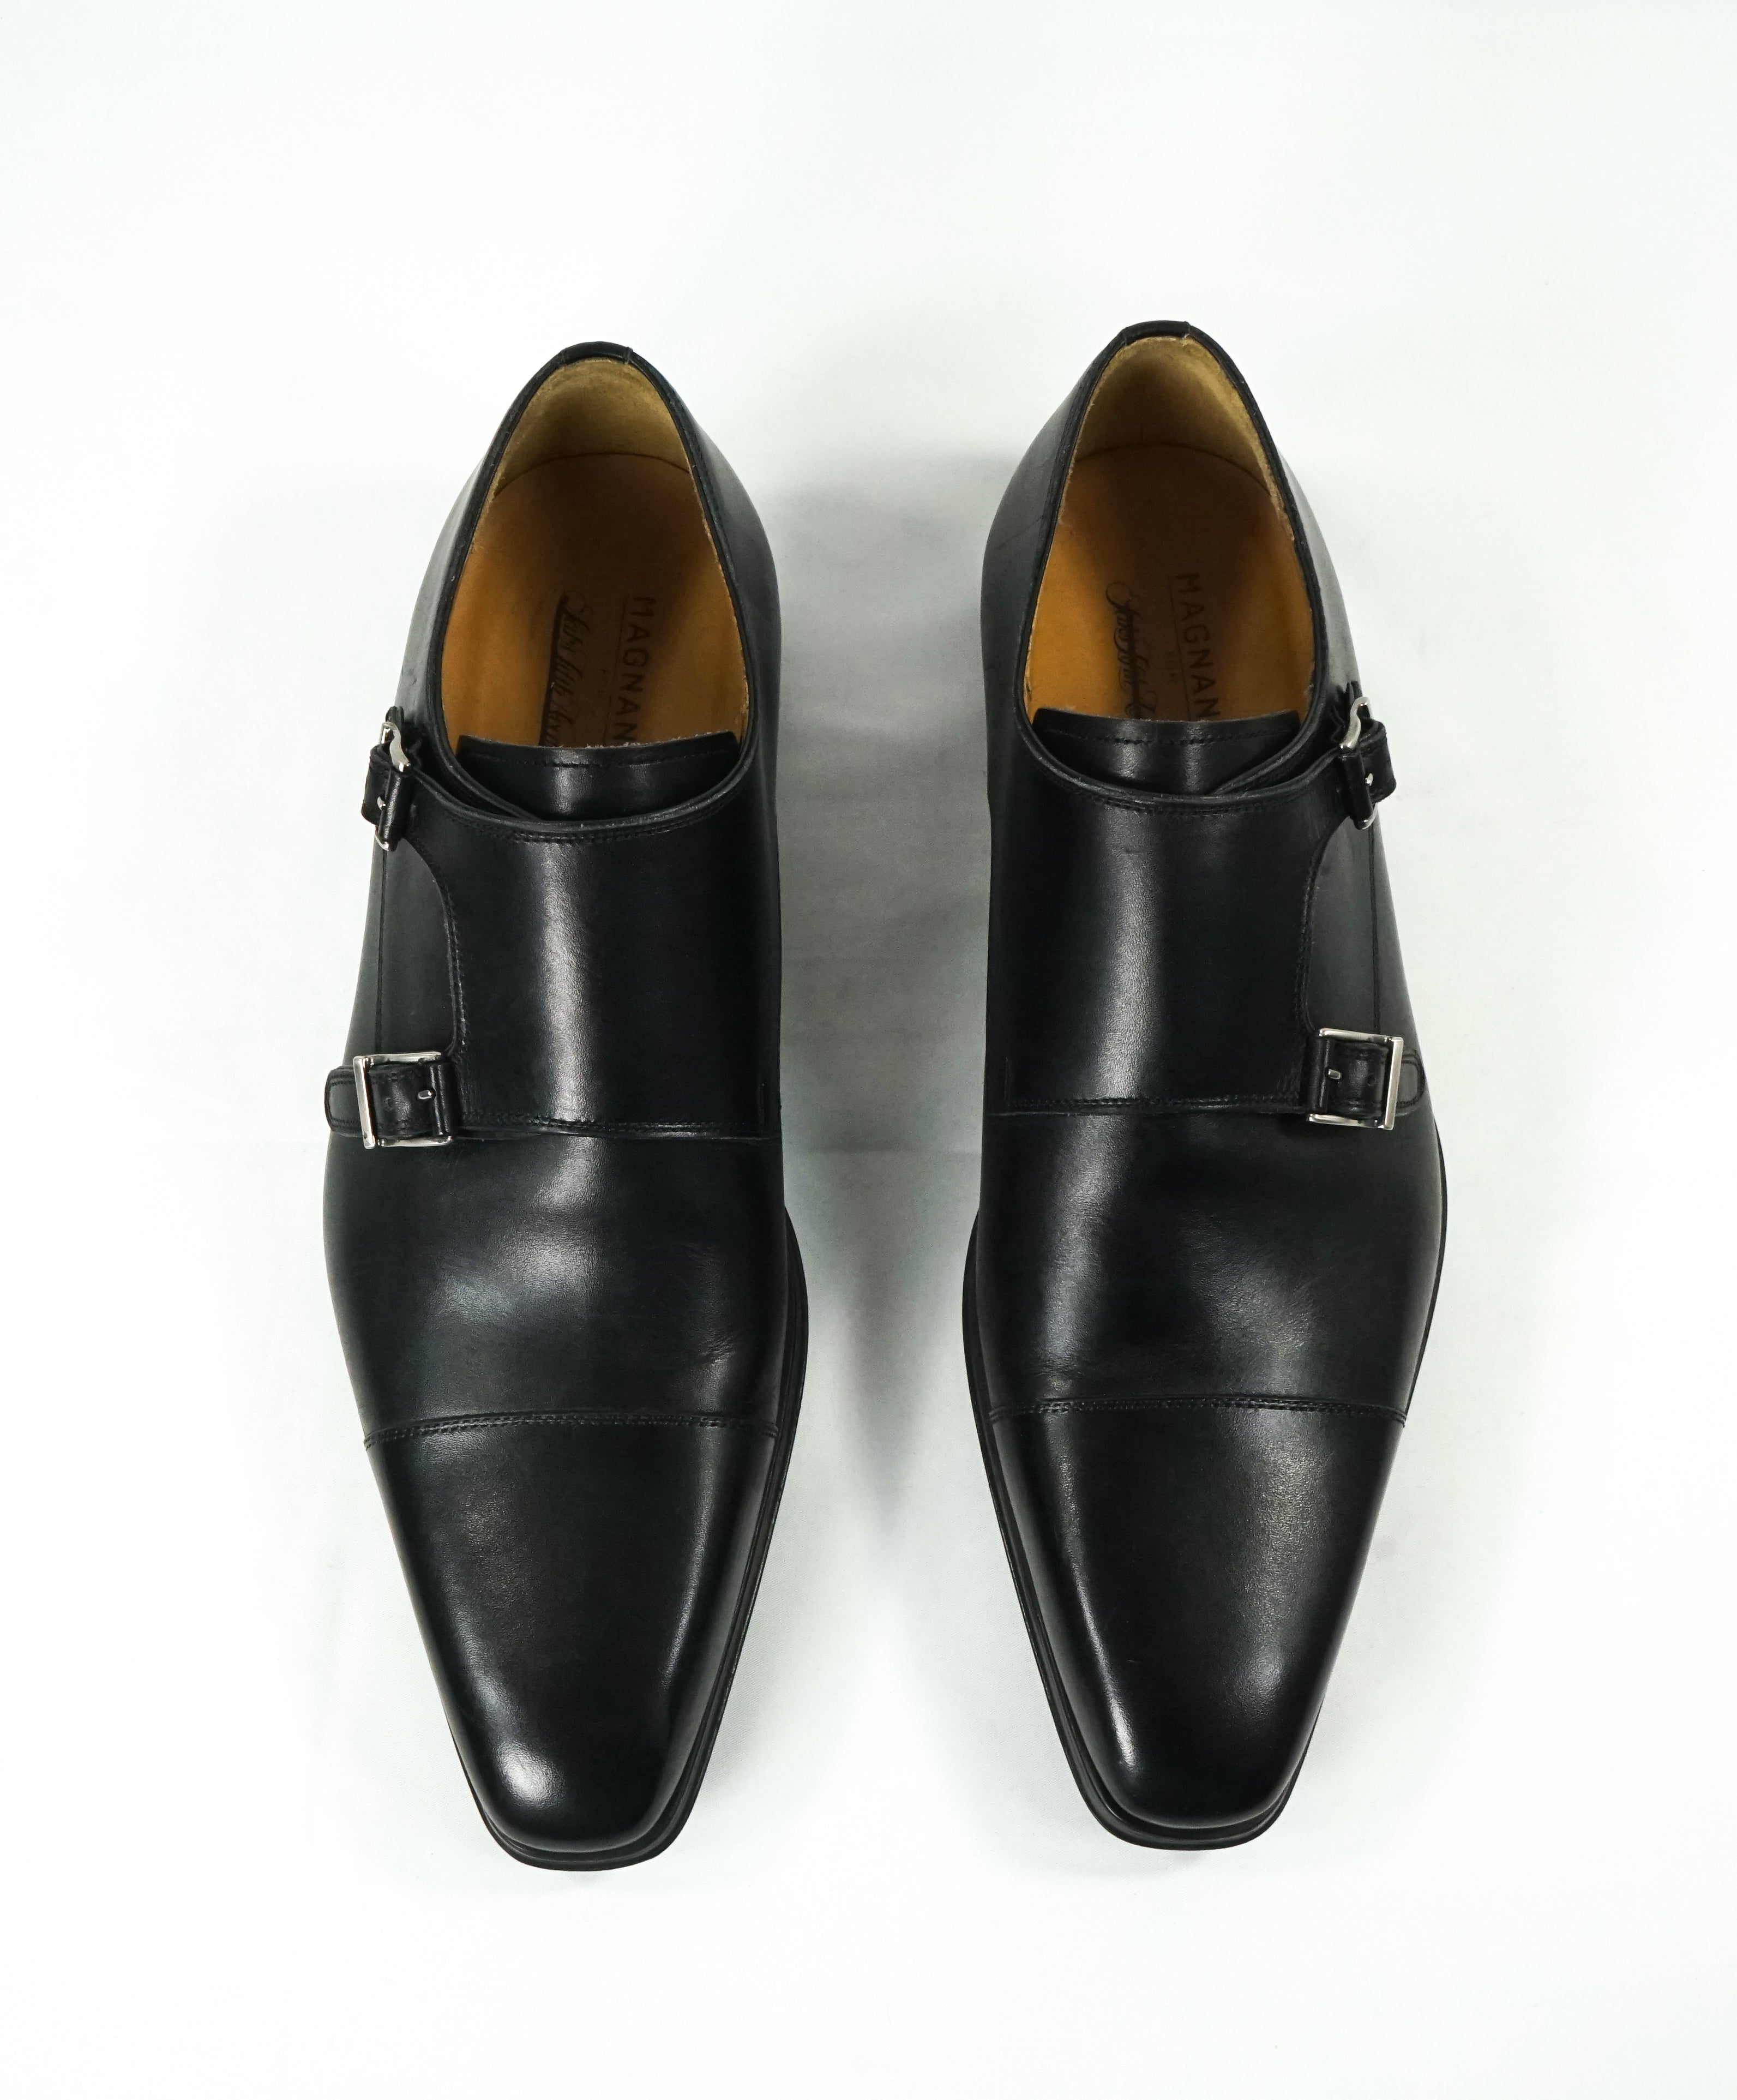 magnanni shoes saks off fifth